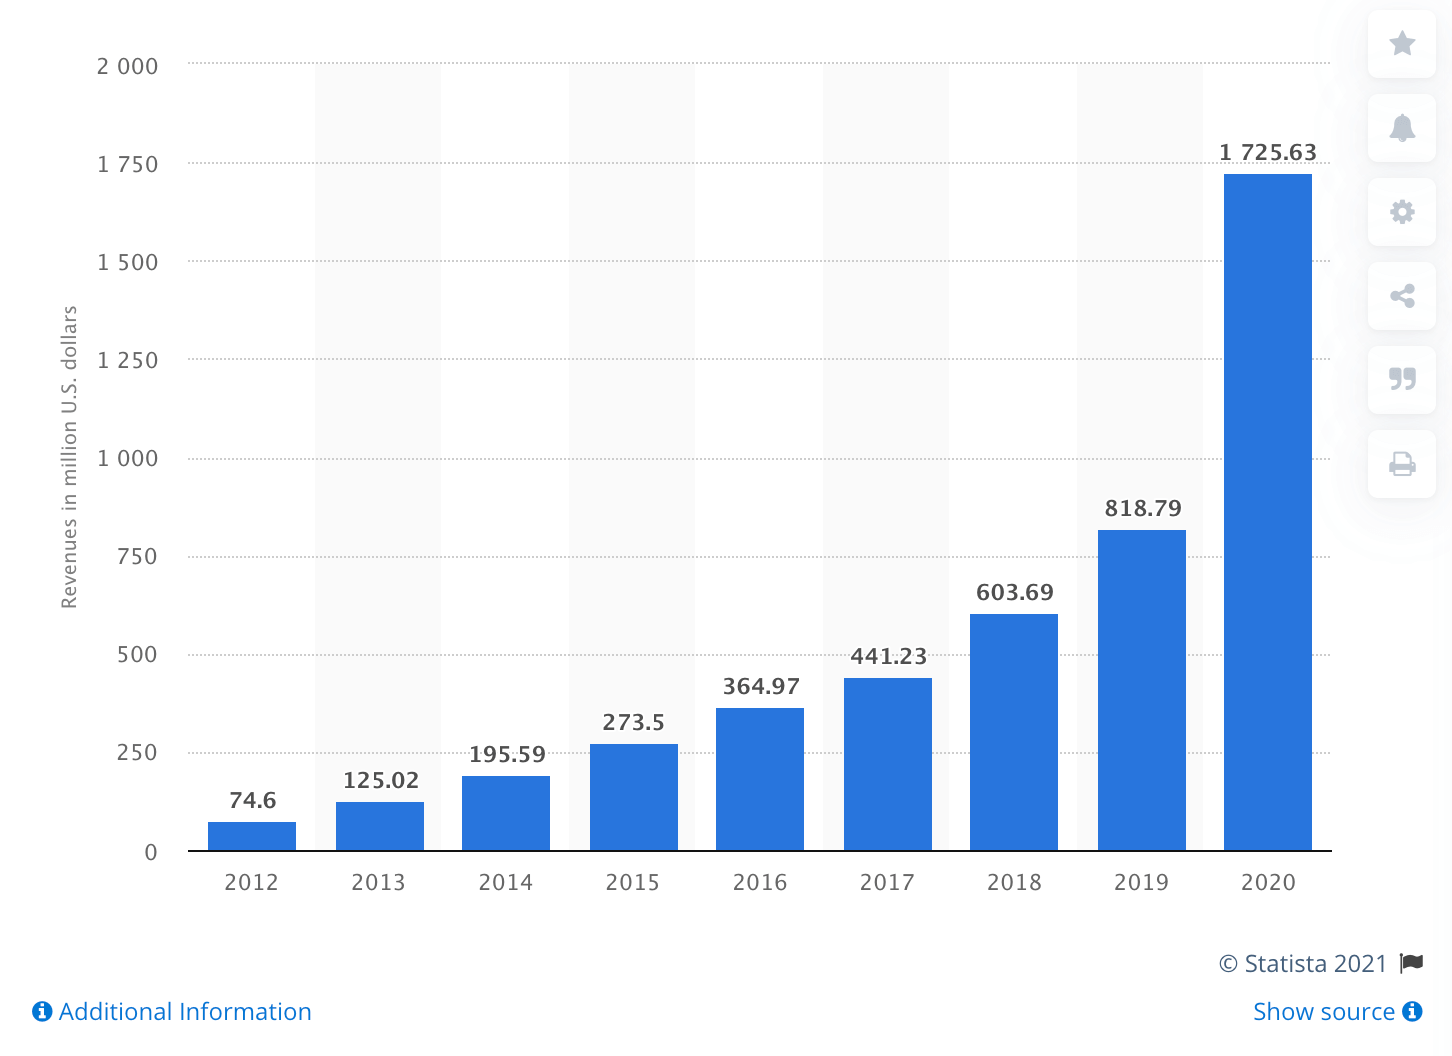 Etsy's growth